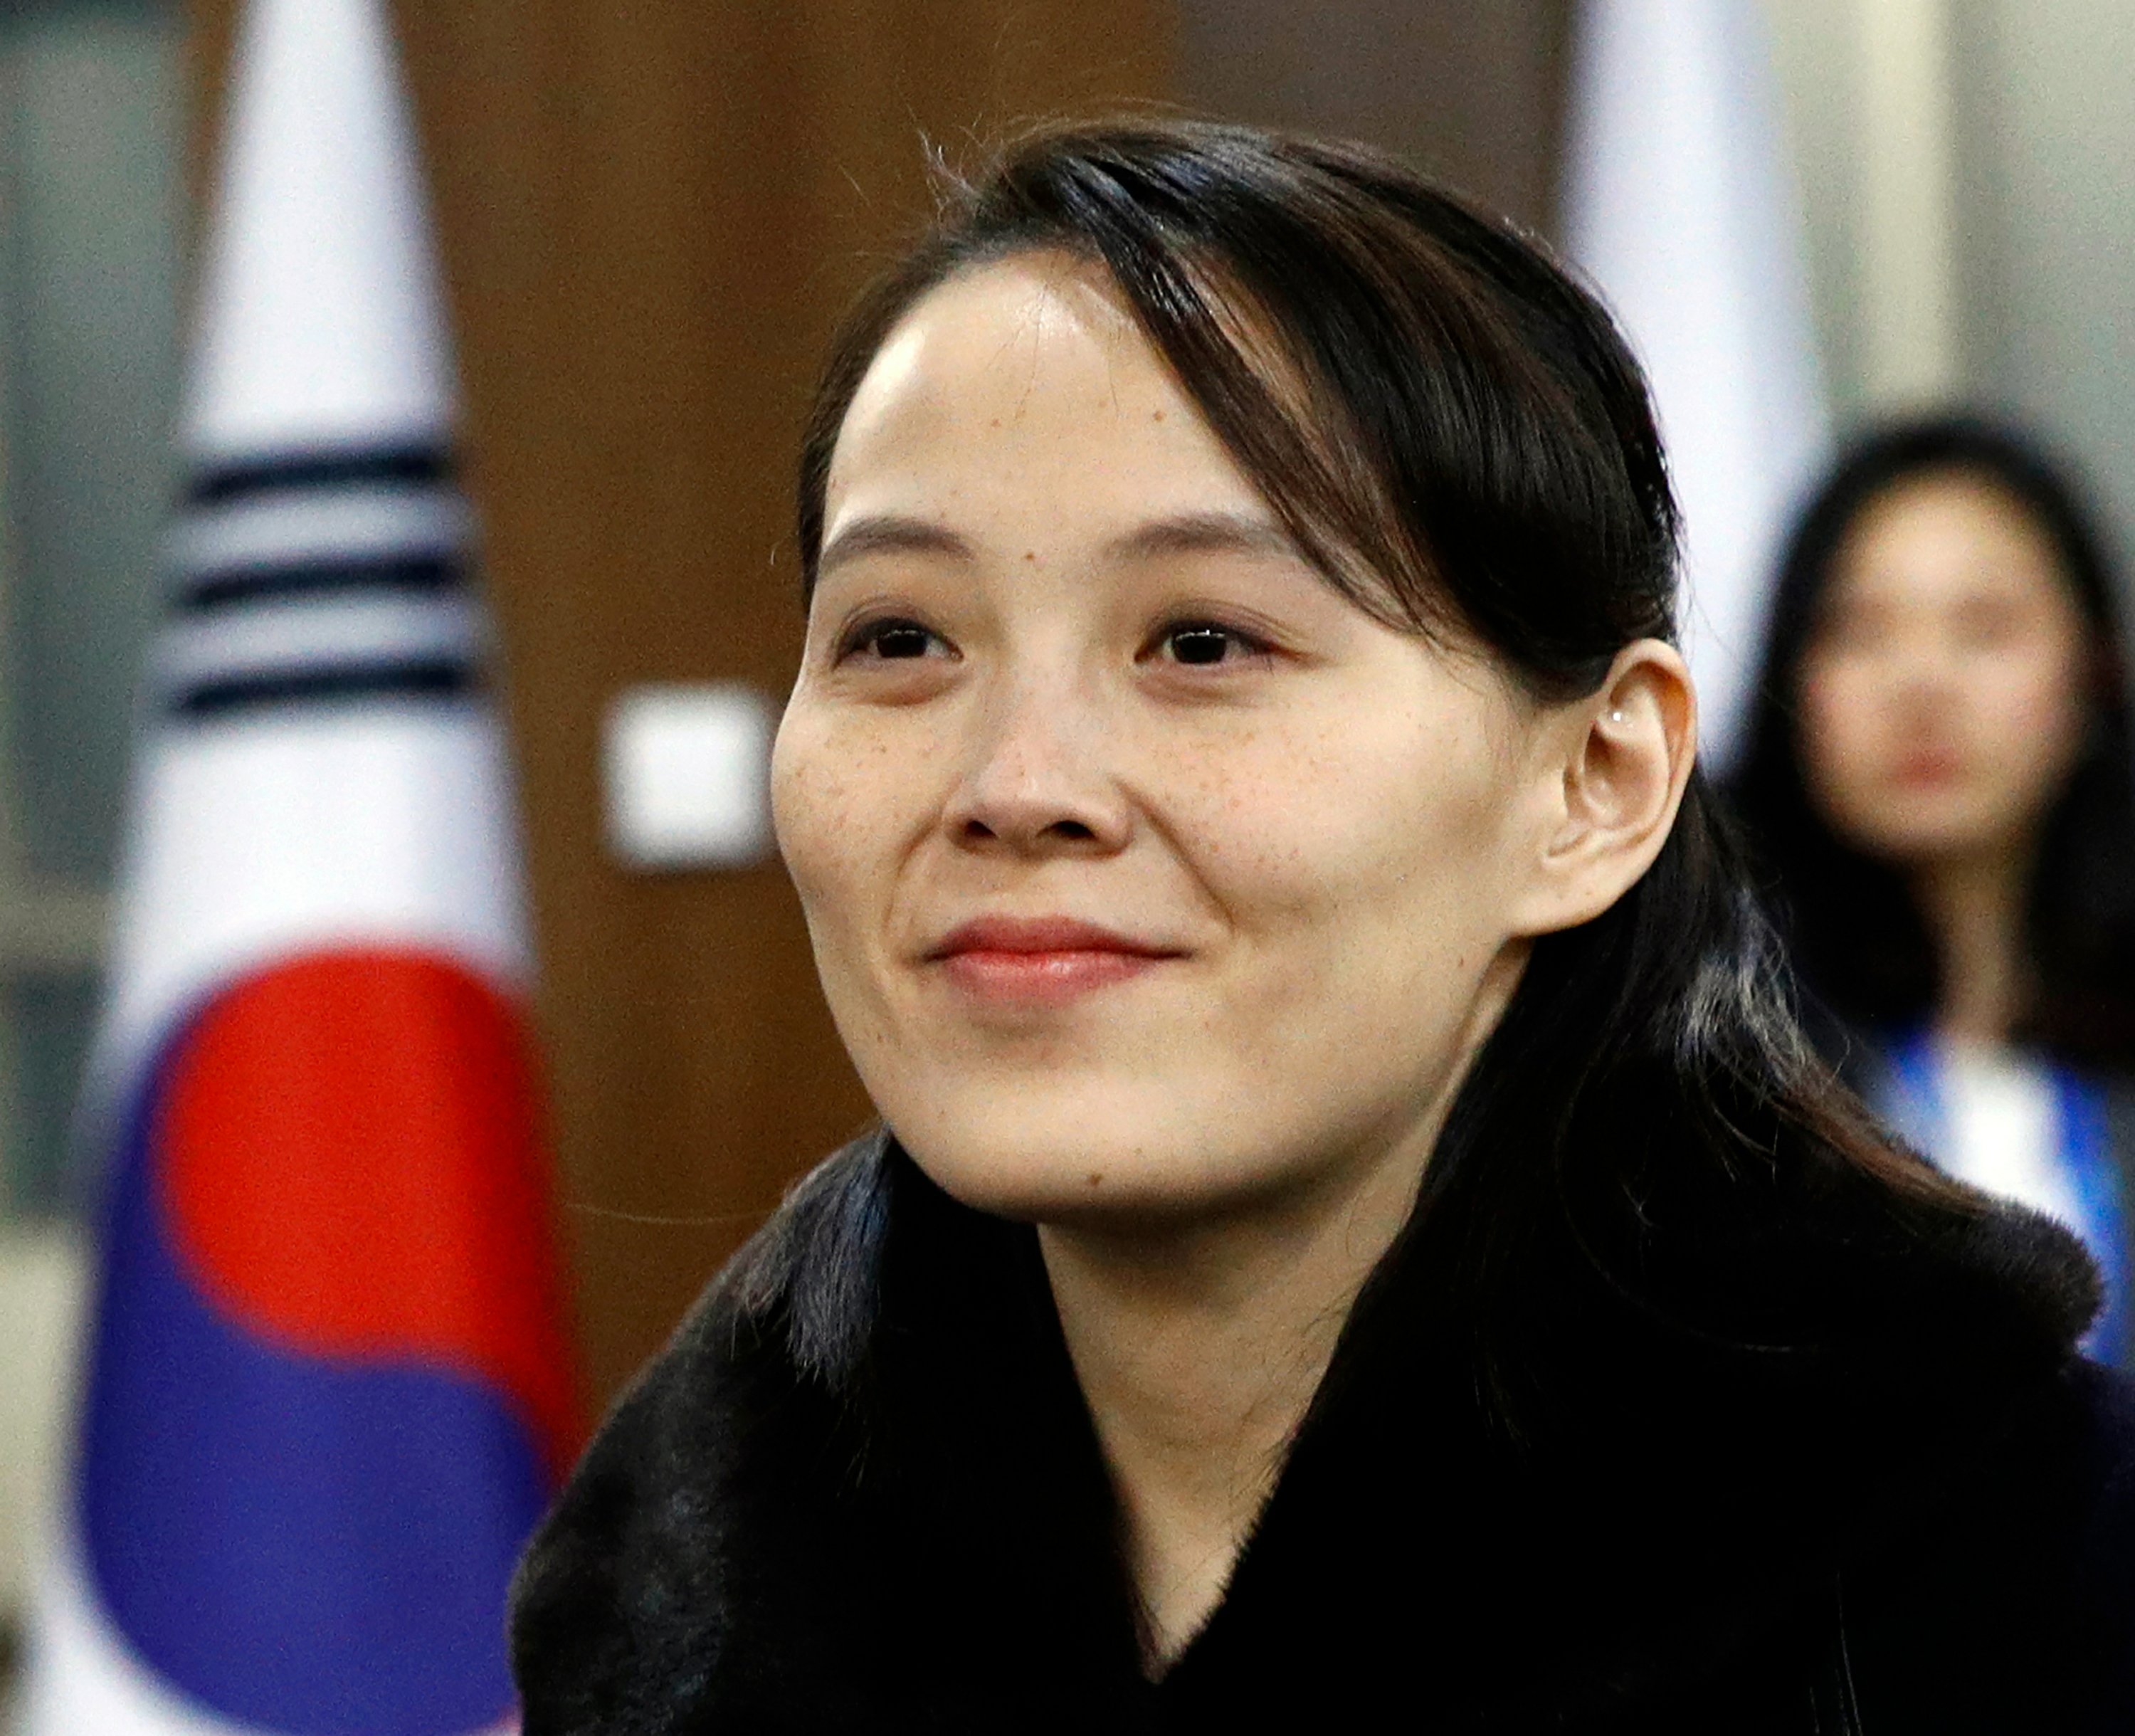 Downgraded?  Pushed to the side?  The fate of Kim Jong Un’s sister is uncertain